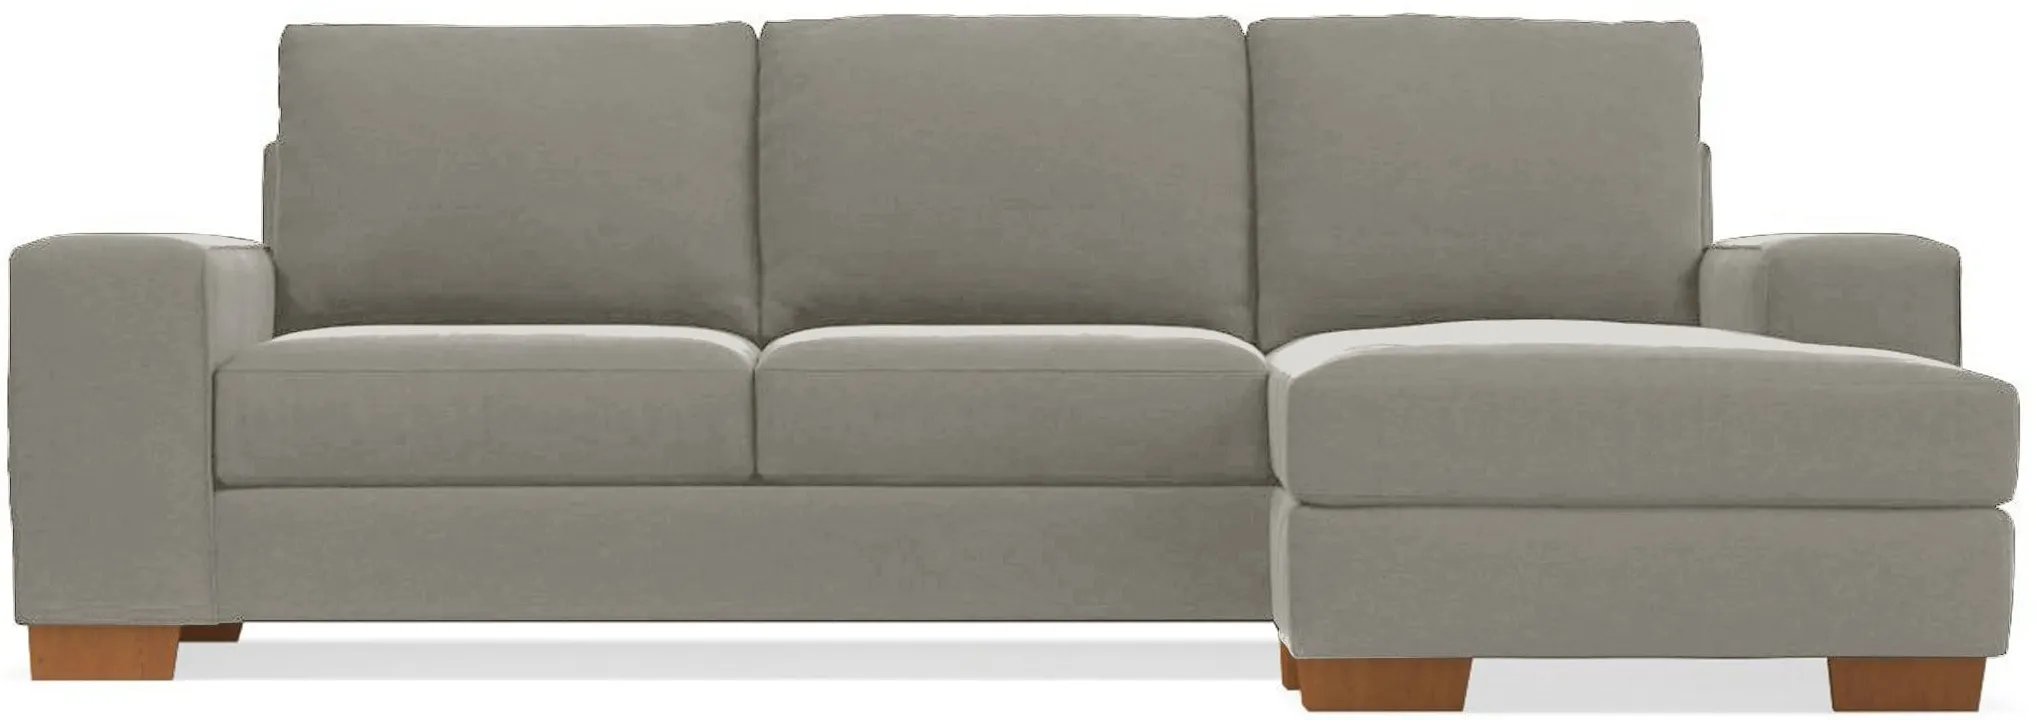 Melrose Reversible Chaise Sleeper Sofa Bed